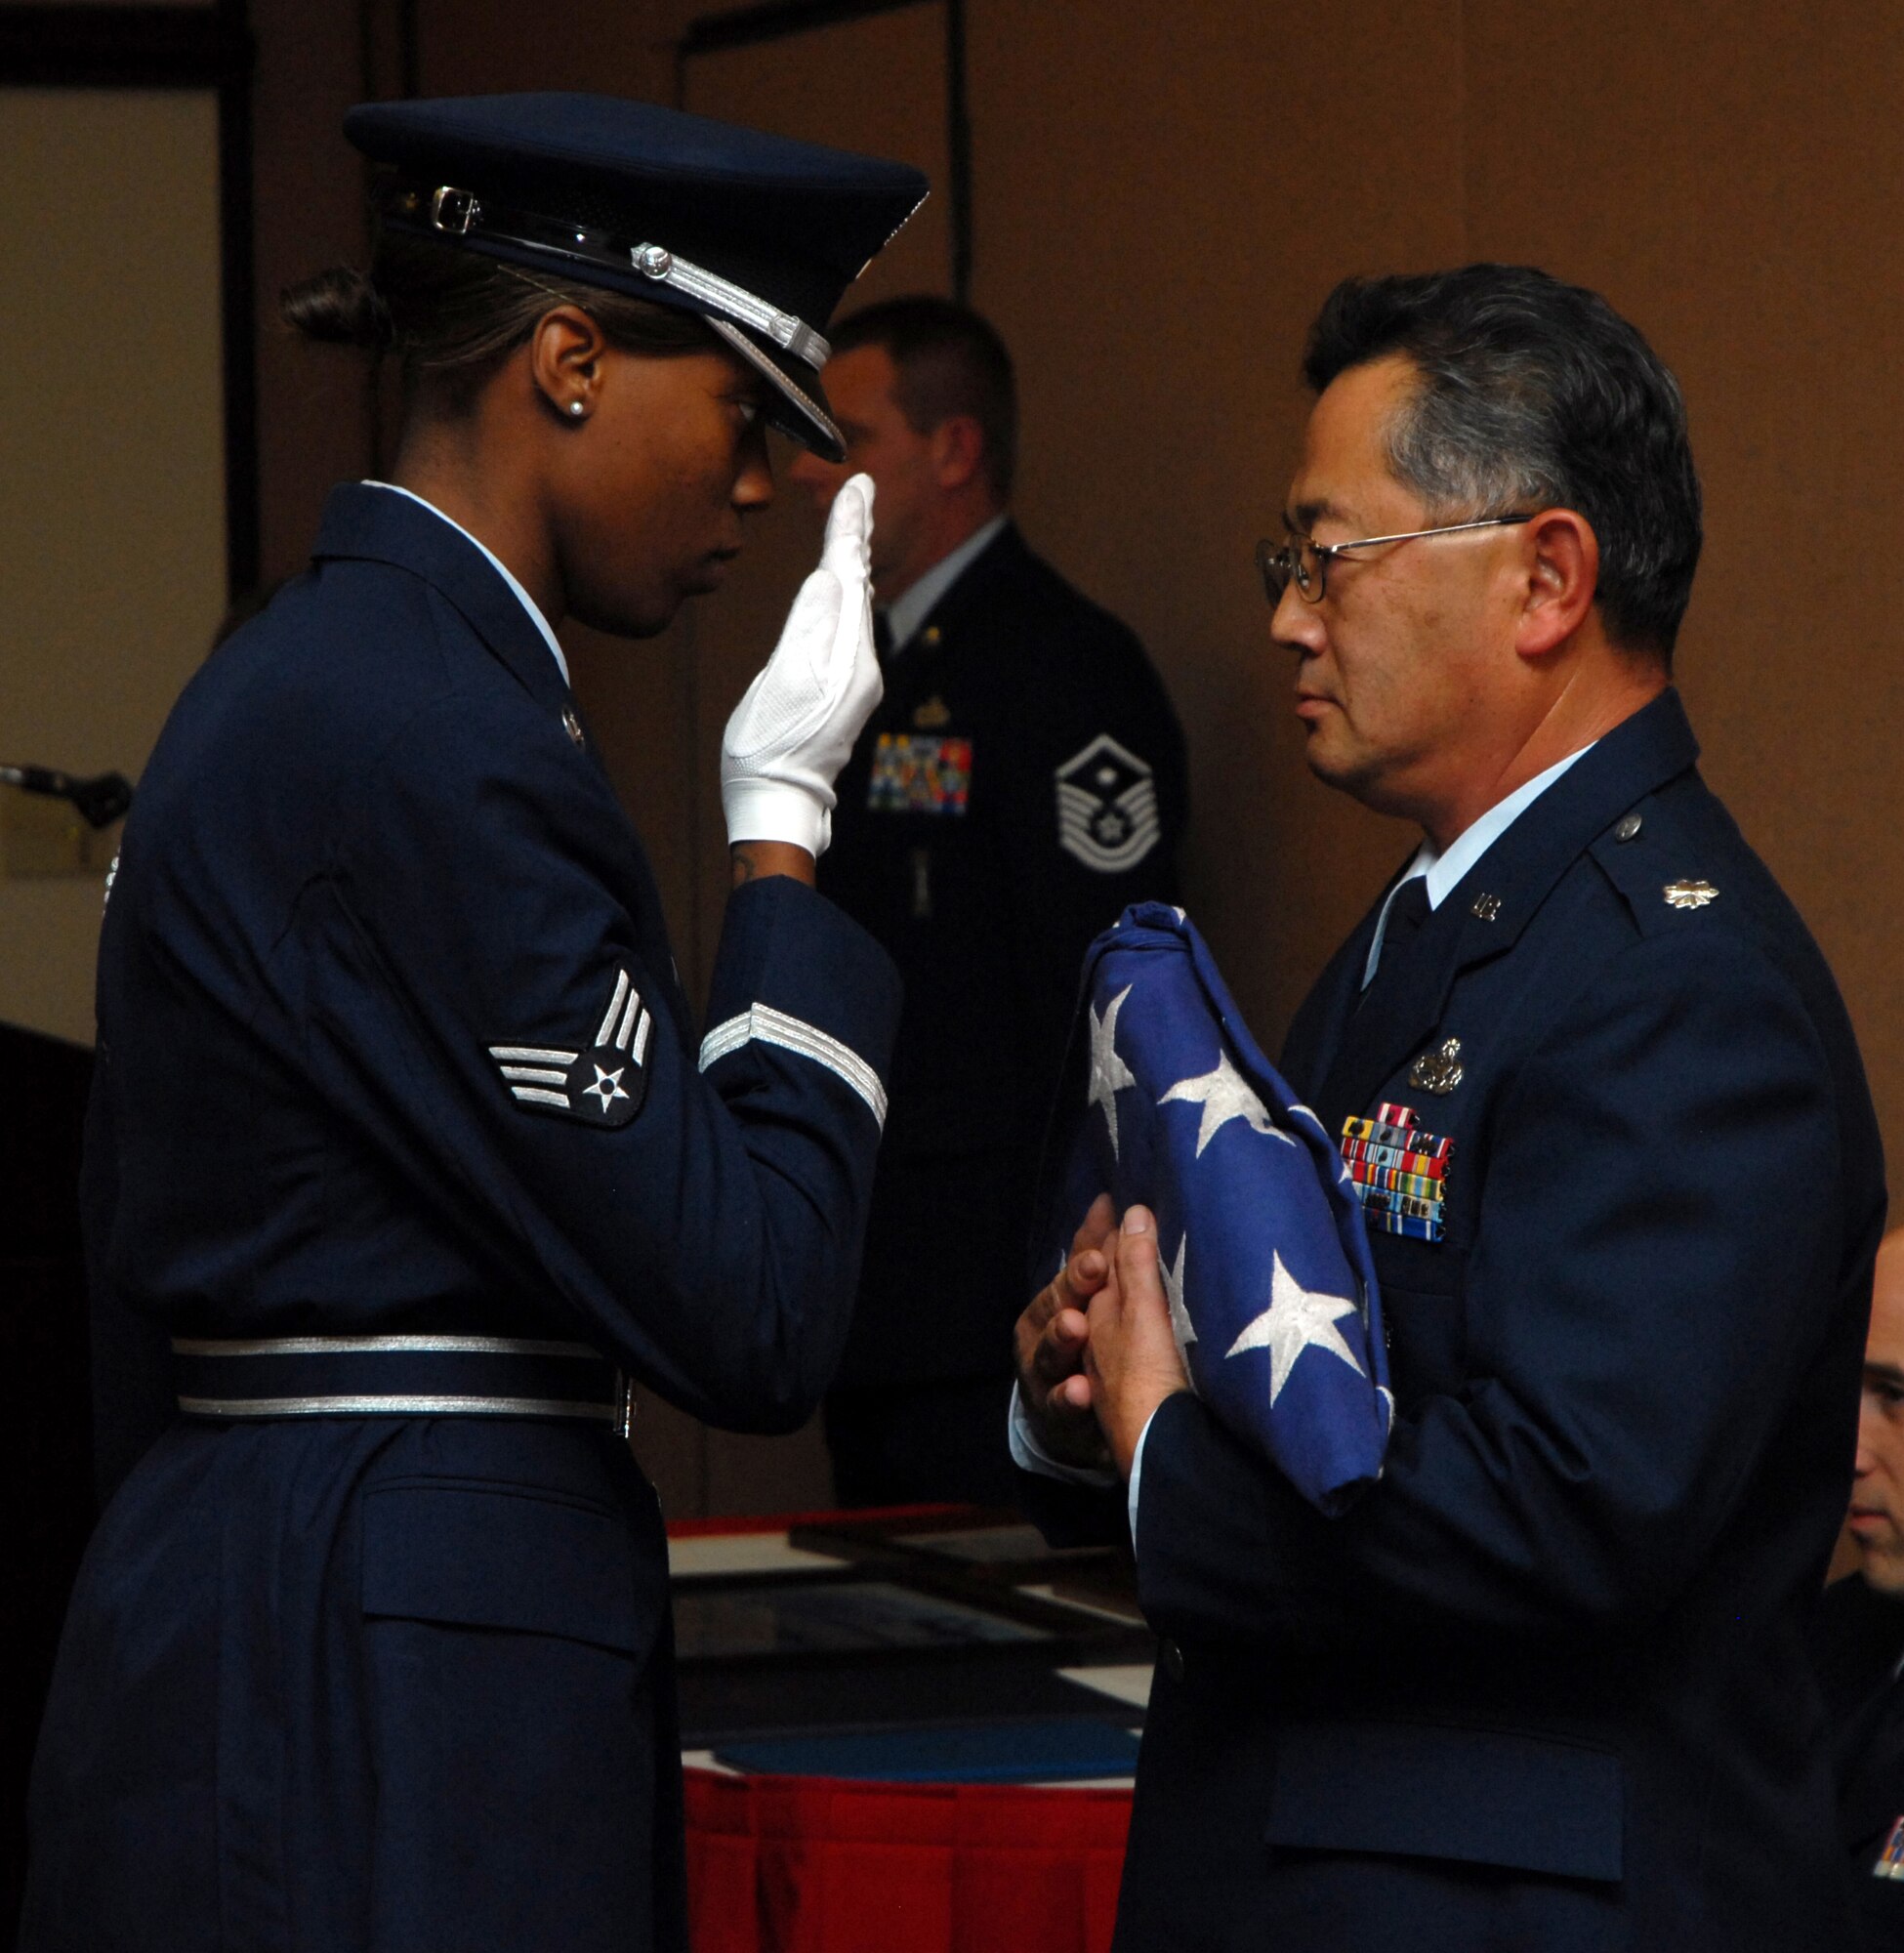 BEALE AIR FORCE BASE, Calif. -- Inspector General of the 940th Air Refueling Wing, Air Force Reservist Lt. Col. Djoko Soejoto receive the American flag from a member of the Beale AFB Honor Guard during his retirement ceremony here, Jan. 10, 2009. Lt. Col Soejoto retired from the Air Force Reserve after 31 years of honorable service. All members of the U.S. armed forces, which include Guard and Reserve, are entitled to a retirement flag.  The ceremony also marked a historical milestone for the wing, as it was the first retirement for the 940th ARW wing commander, Col. Jeffrey "Sal" Mineo. (U.S. Air Force Photo/ Tech. Sgt. Luke Johnson)